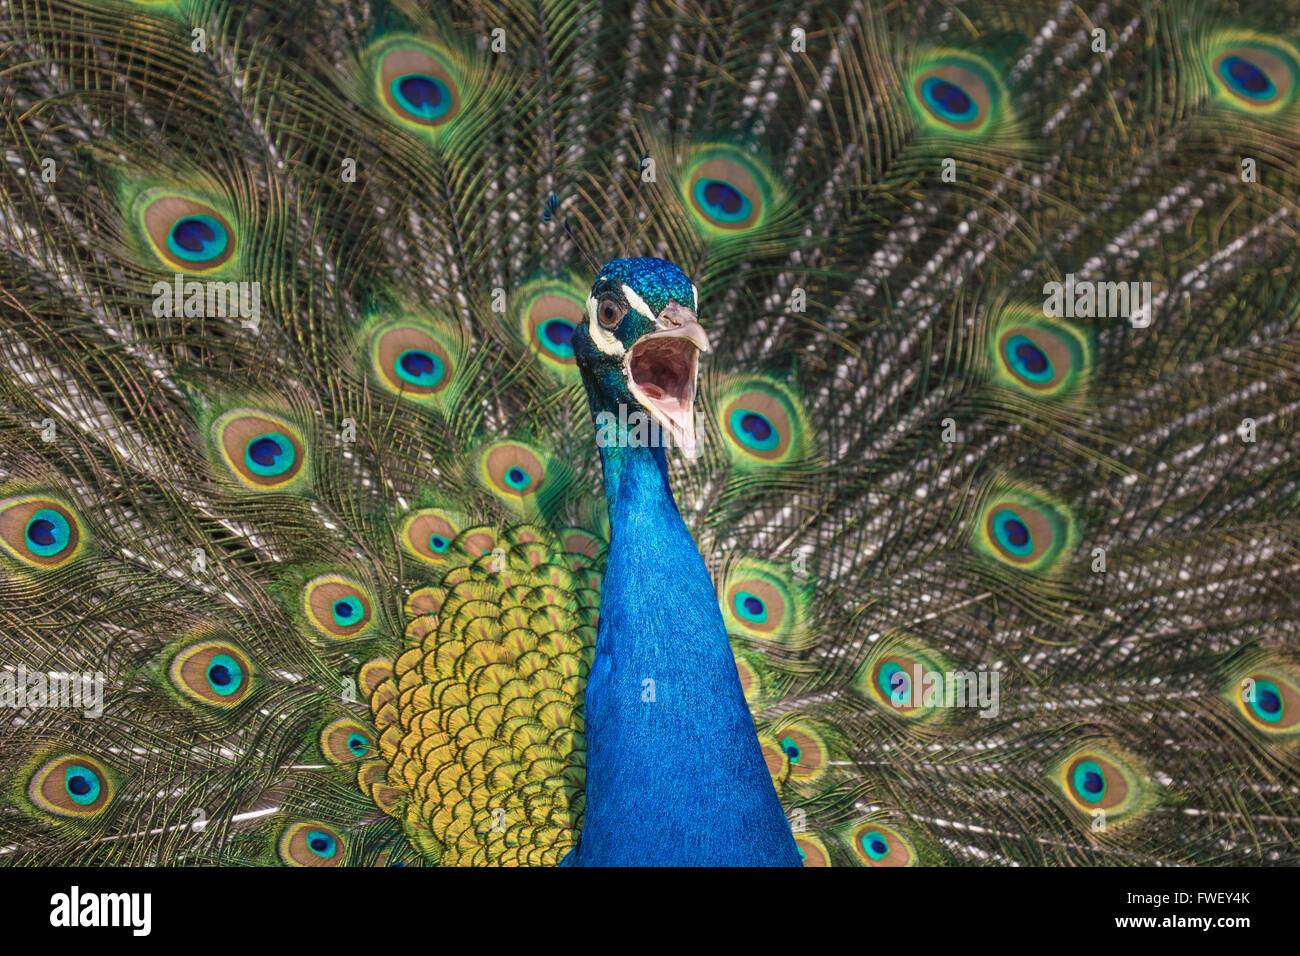 A shouting peacock against his colorful feathers in the background Stock Photo